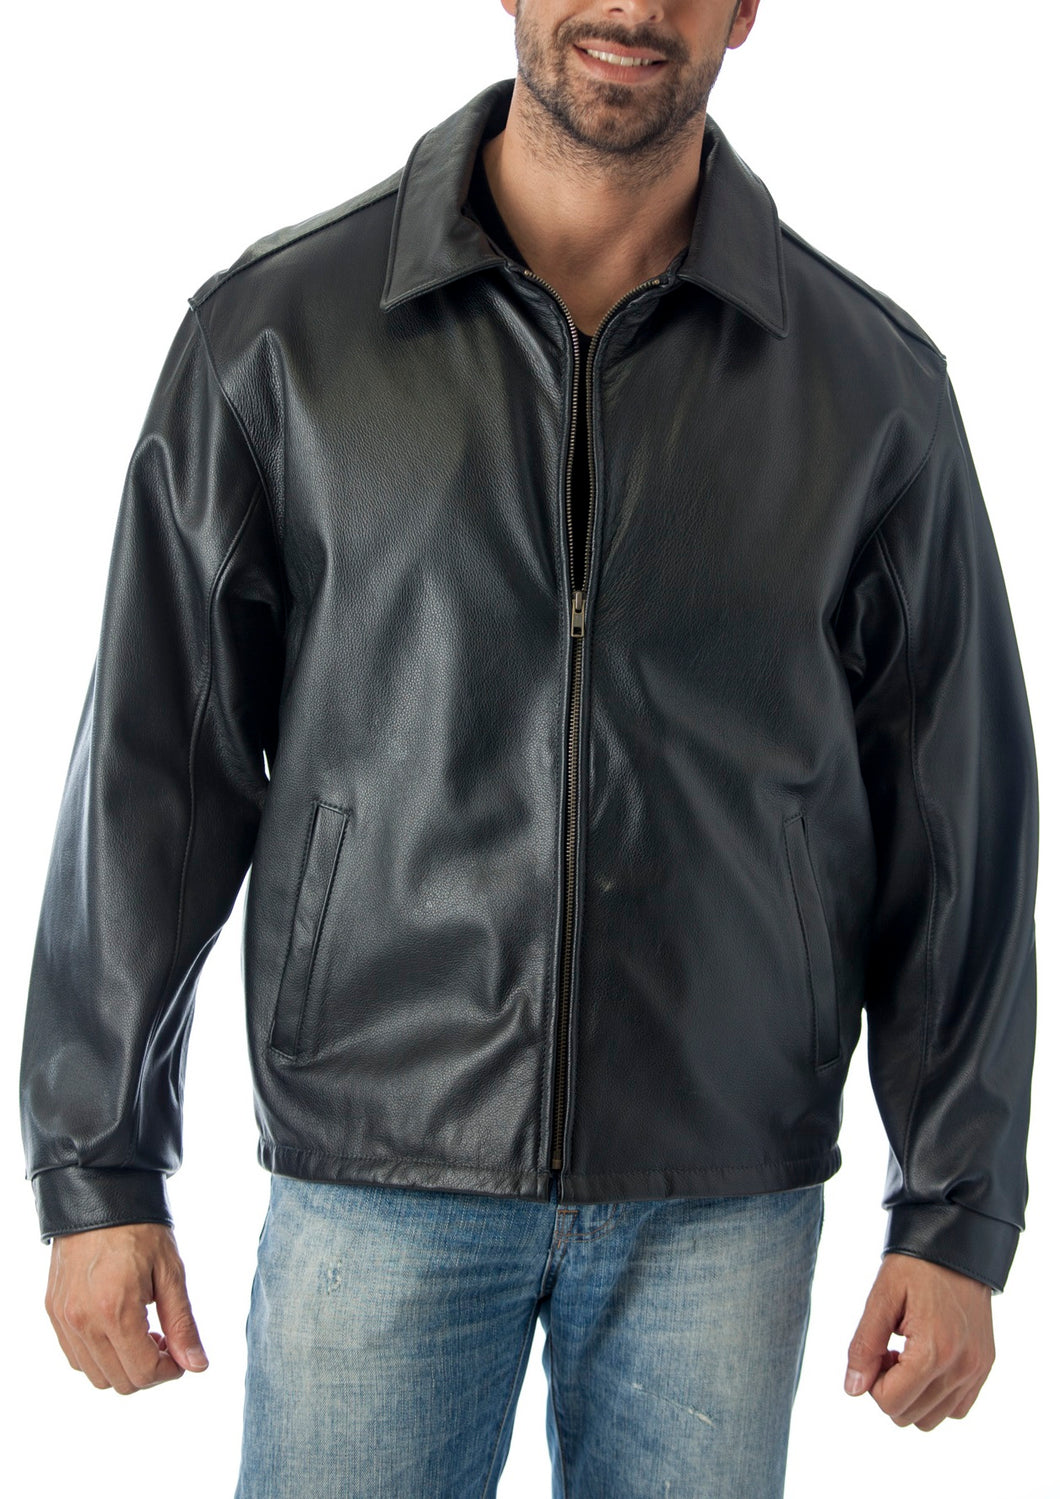 Big and Tall Casual Leather CowHide  Jacket Union Made in USA